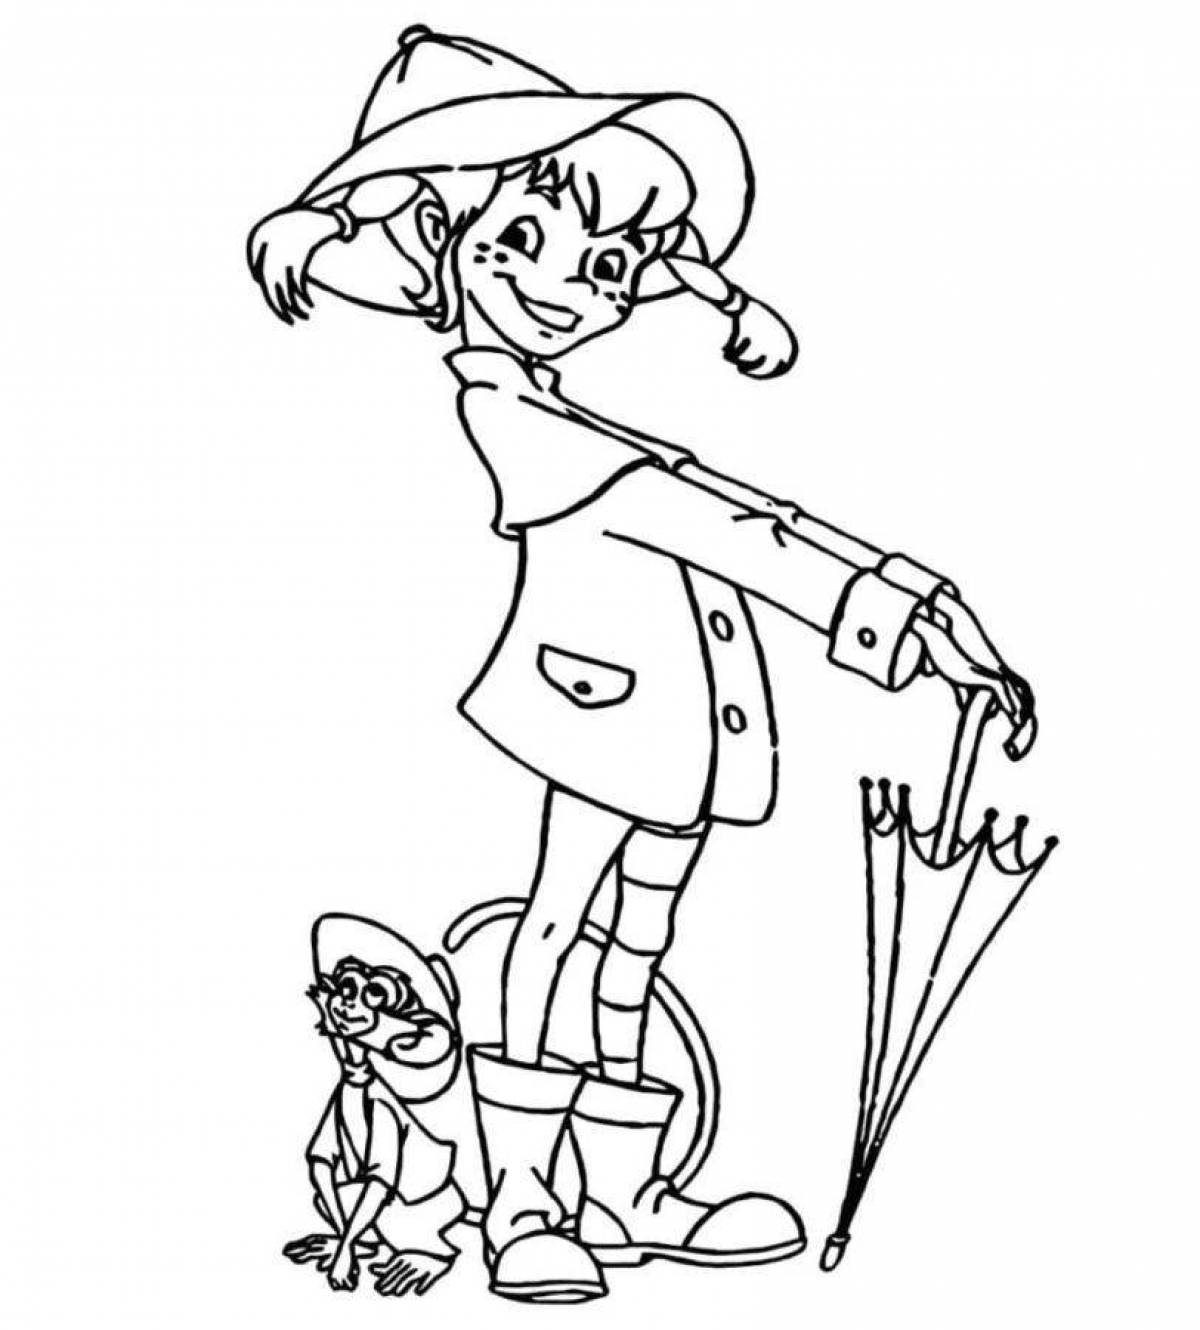 Pippi longstocking awesome coloring book